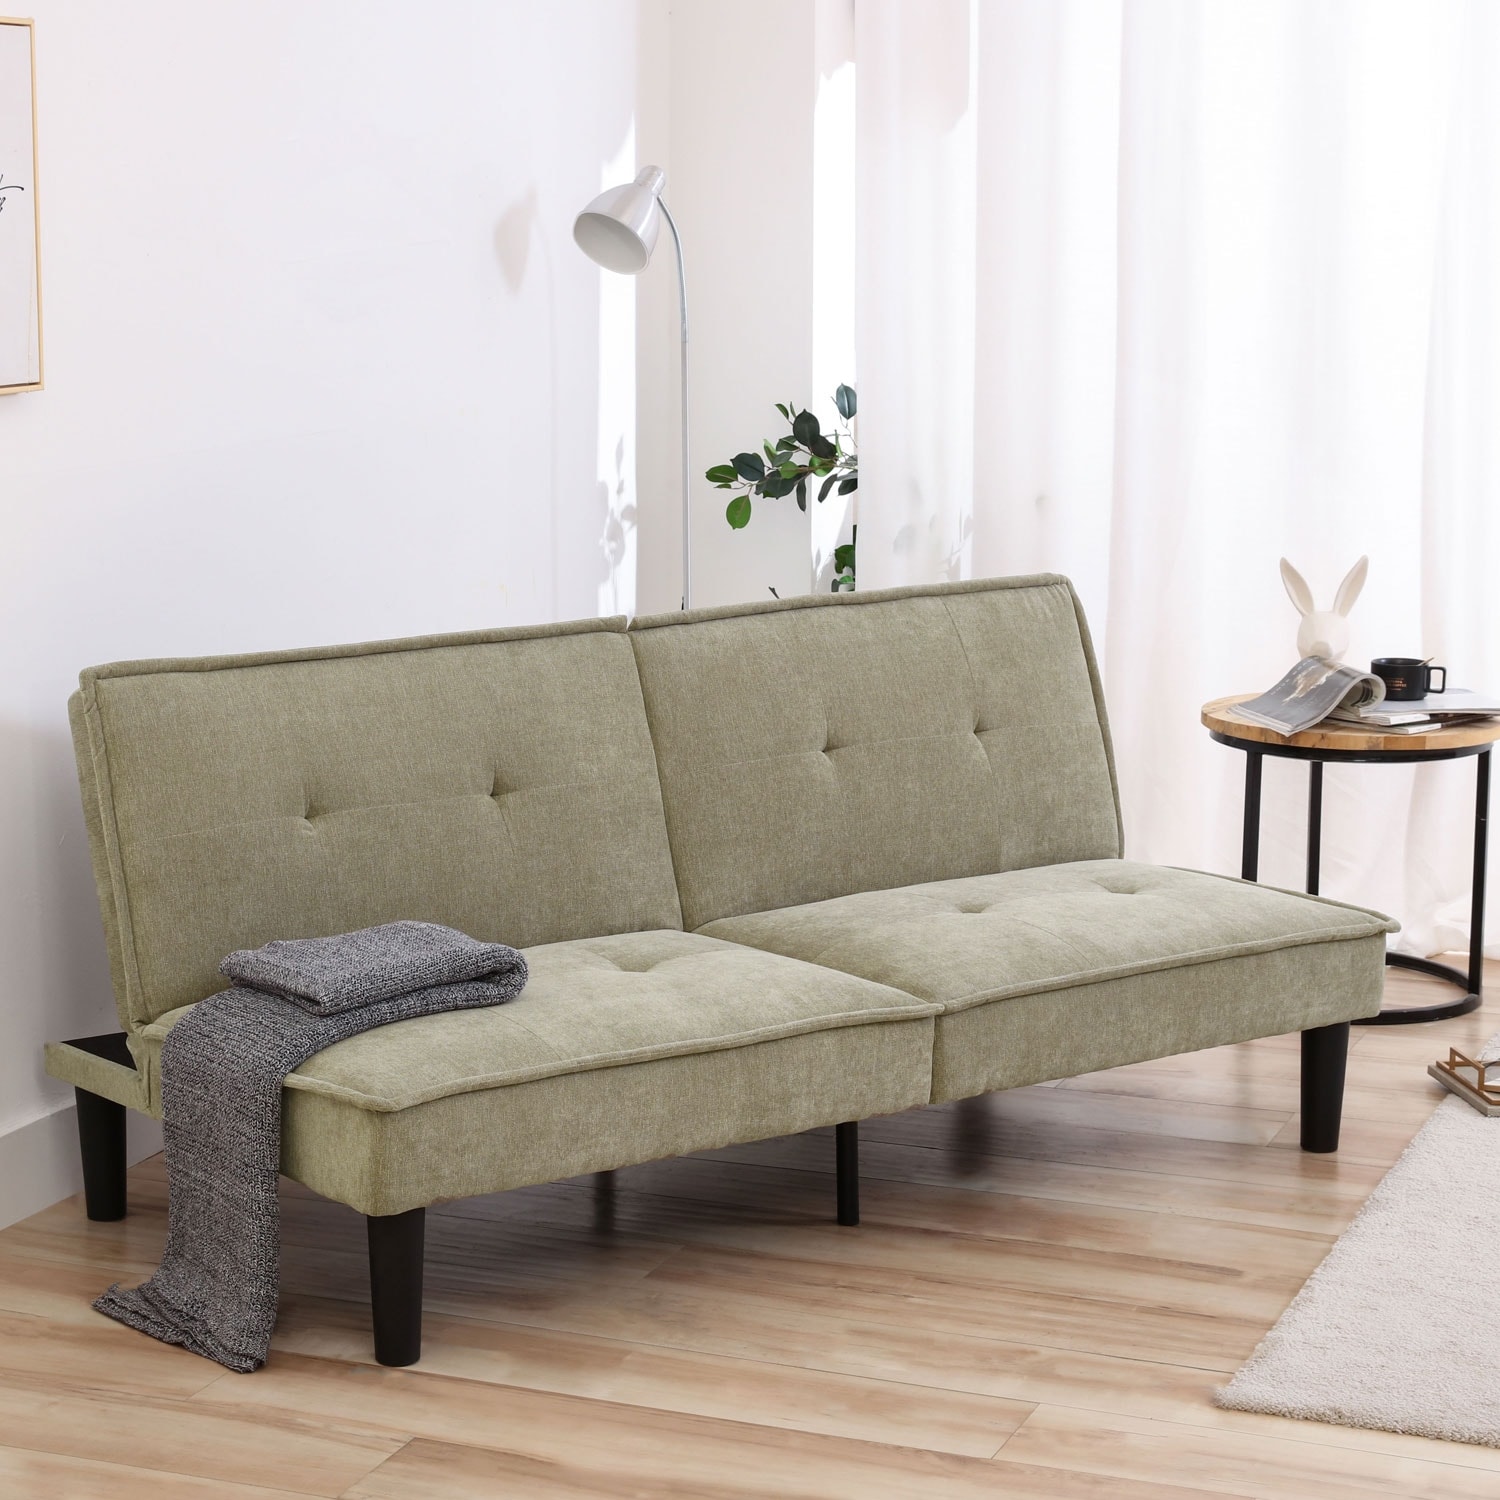 Convertible Futon Sofa Bed Couch Full Size Mattress Solid Living Room Furniture 